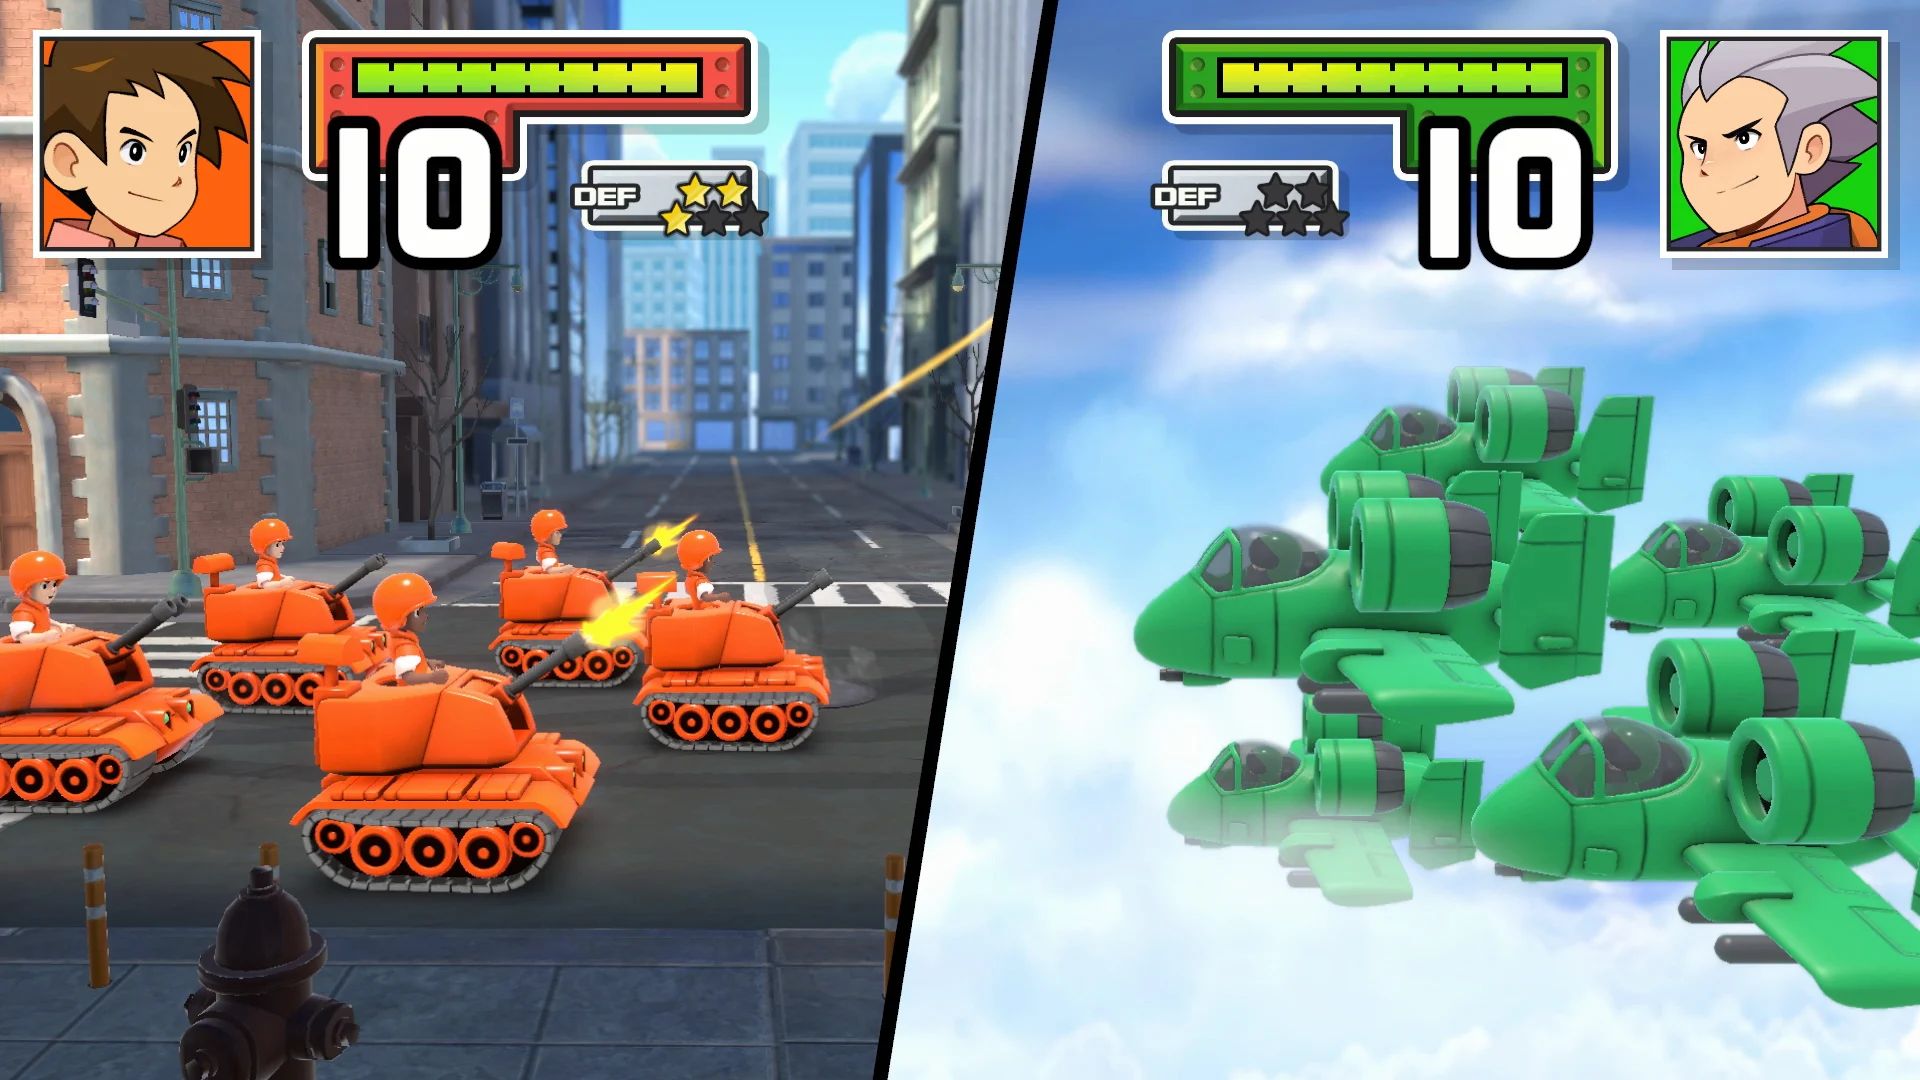 advance-wars-1-2-re-boot-camp-announced-for-nintendo-switch